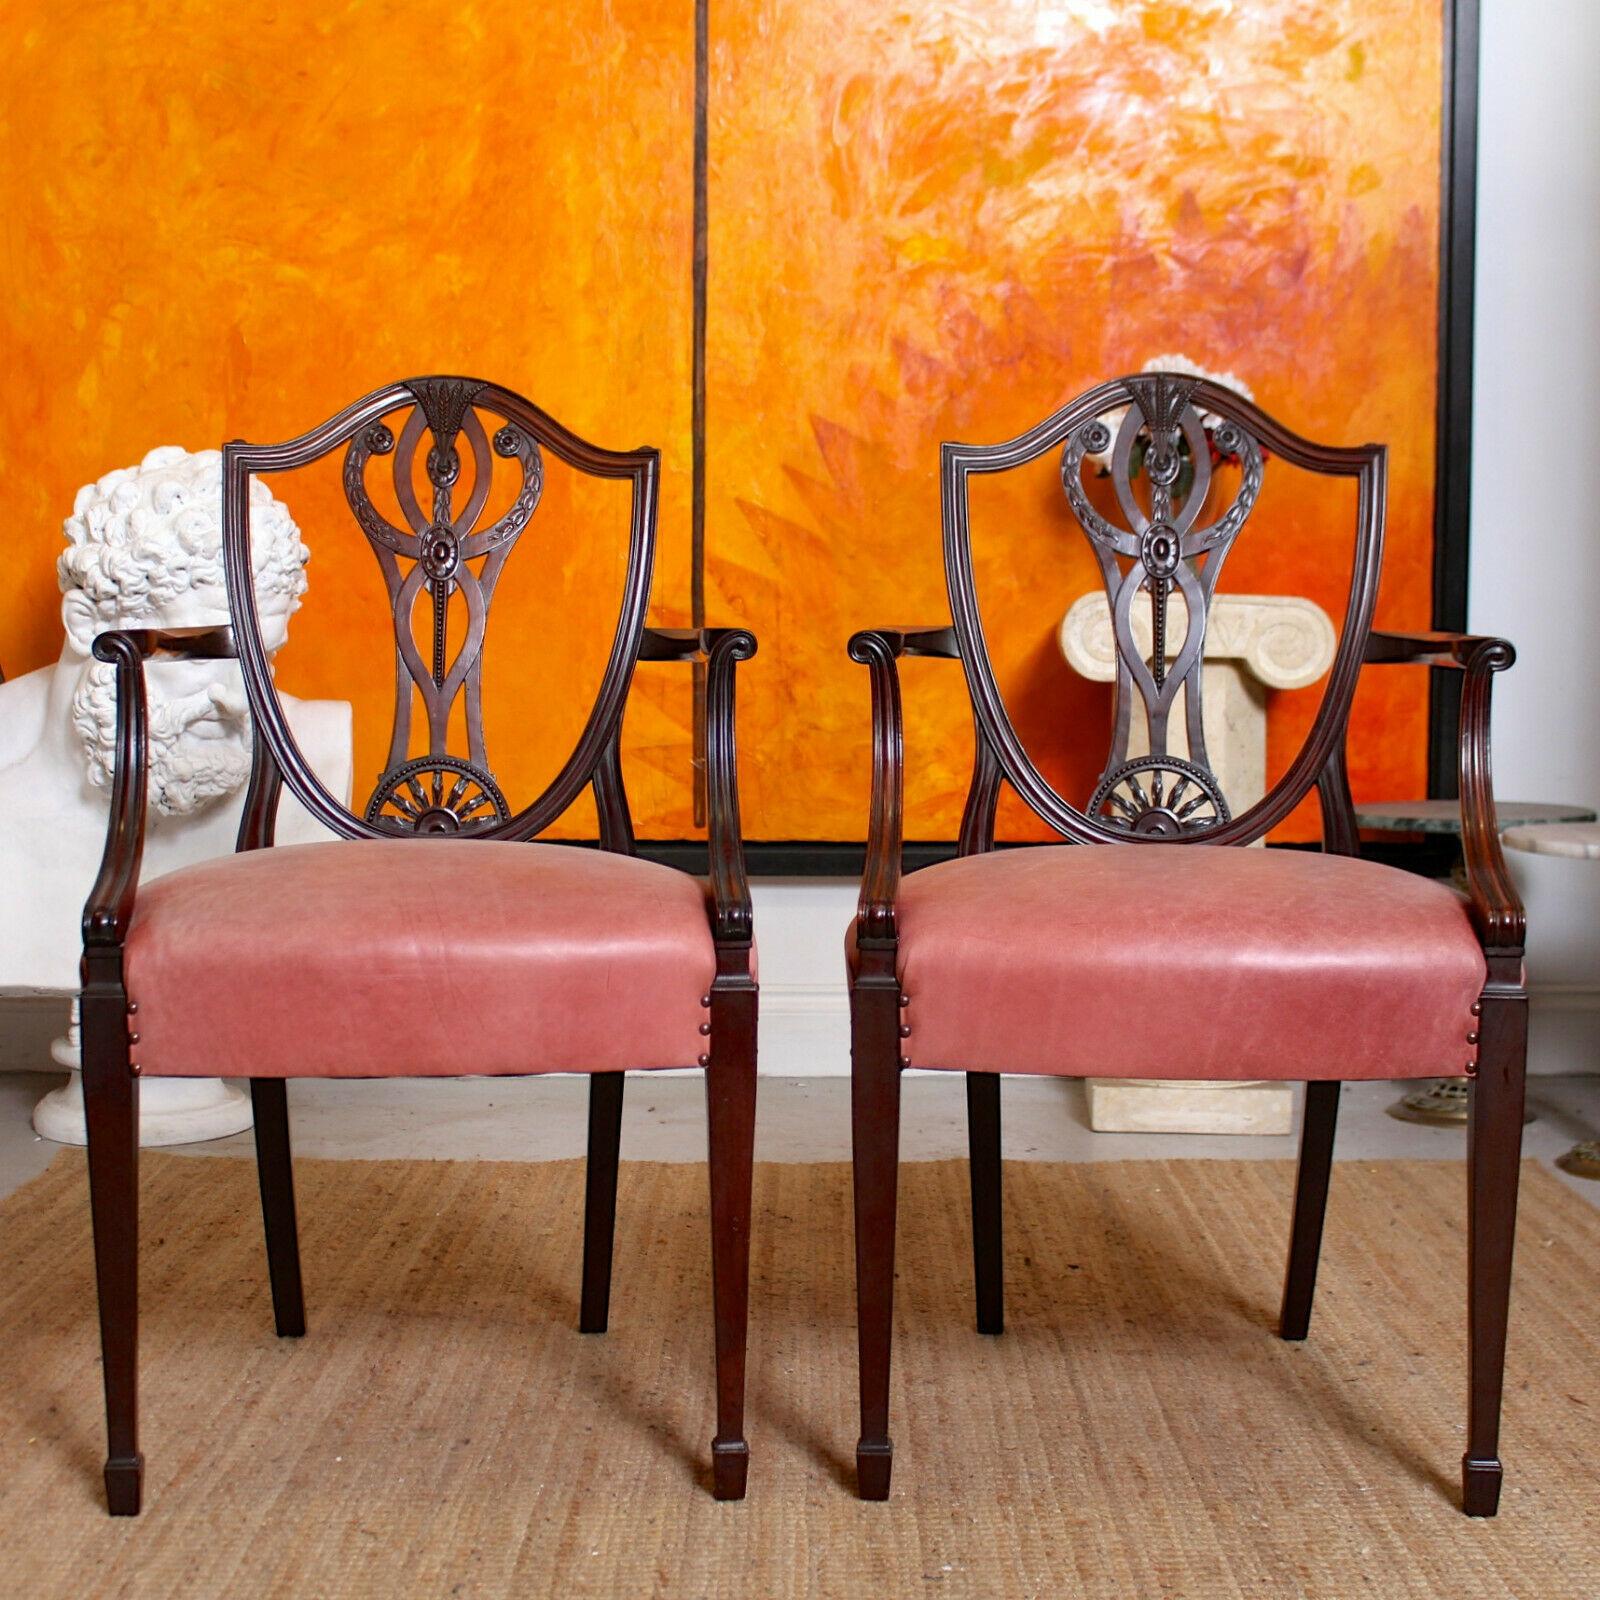 6 English Dining Chairs Hepplewhite Mahogany Leather, 19th Century For Sale 2